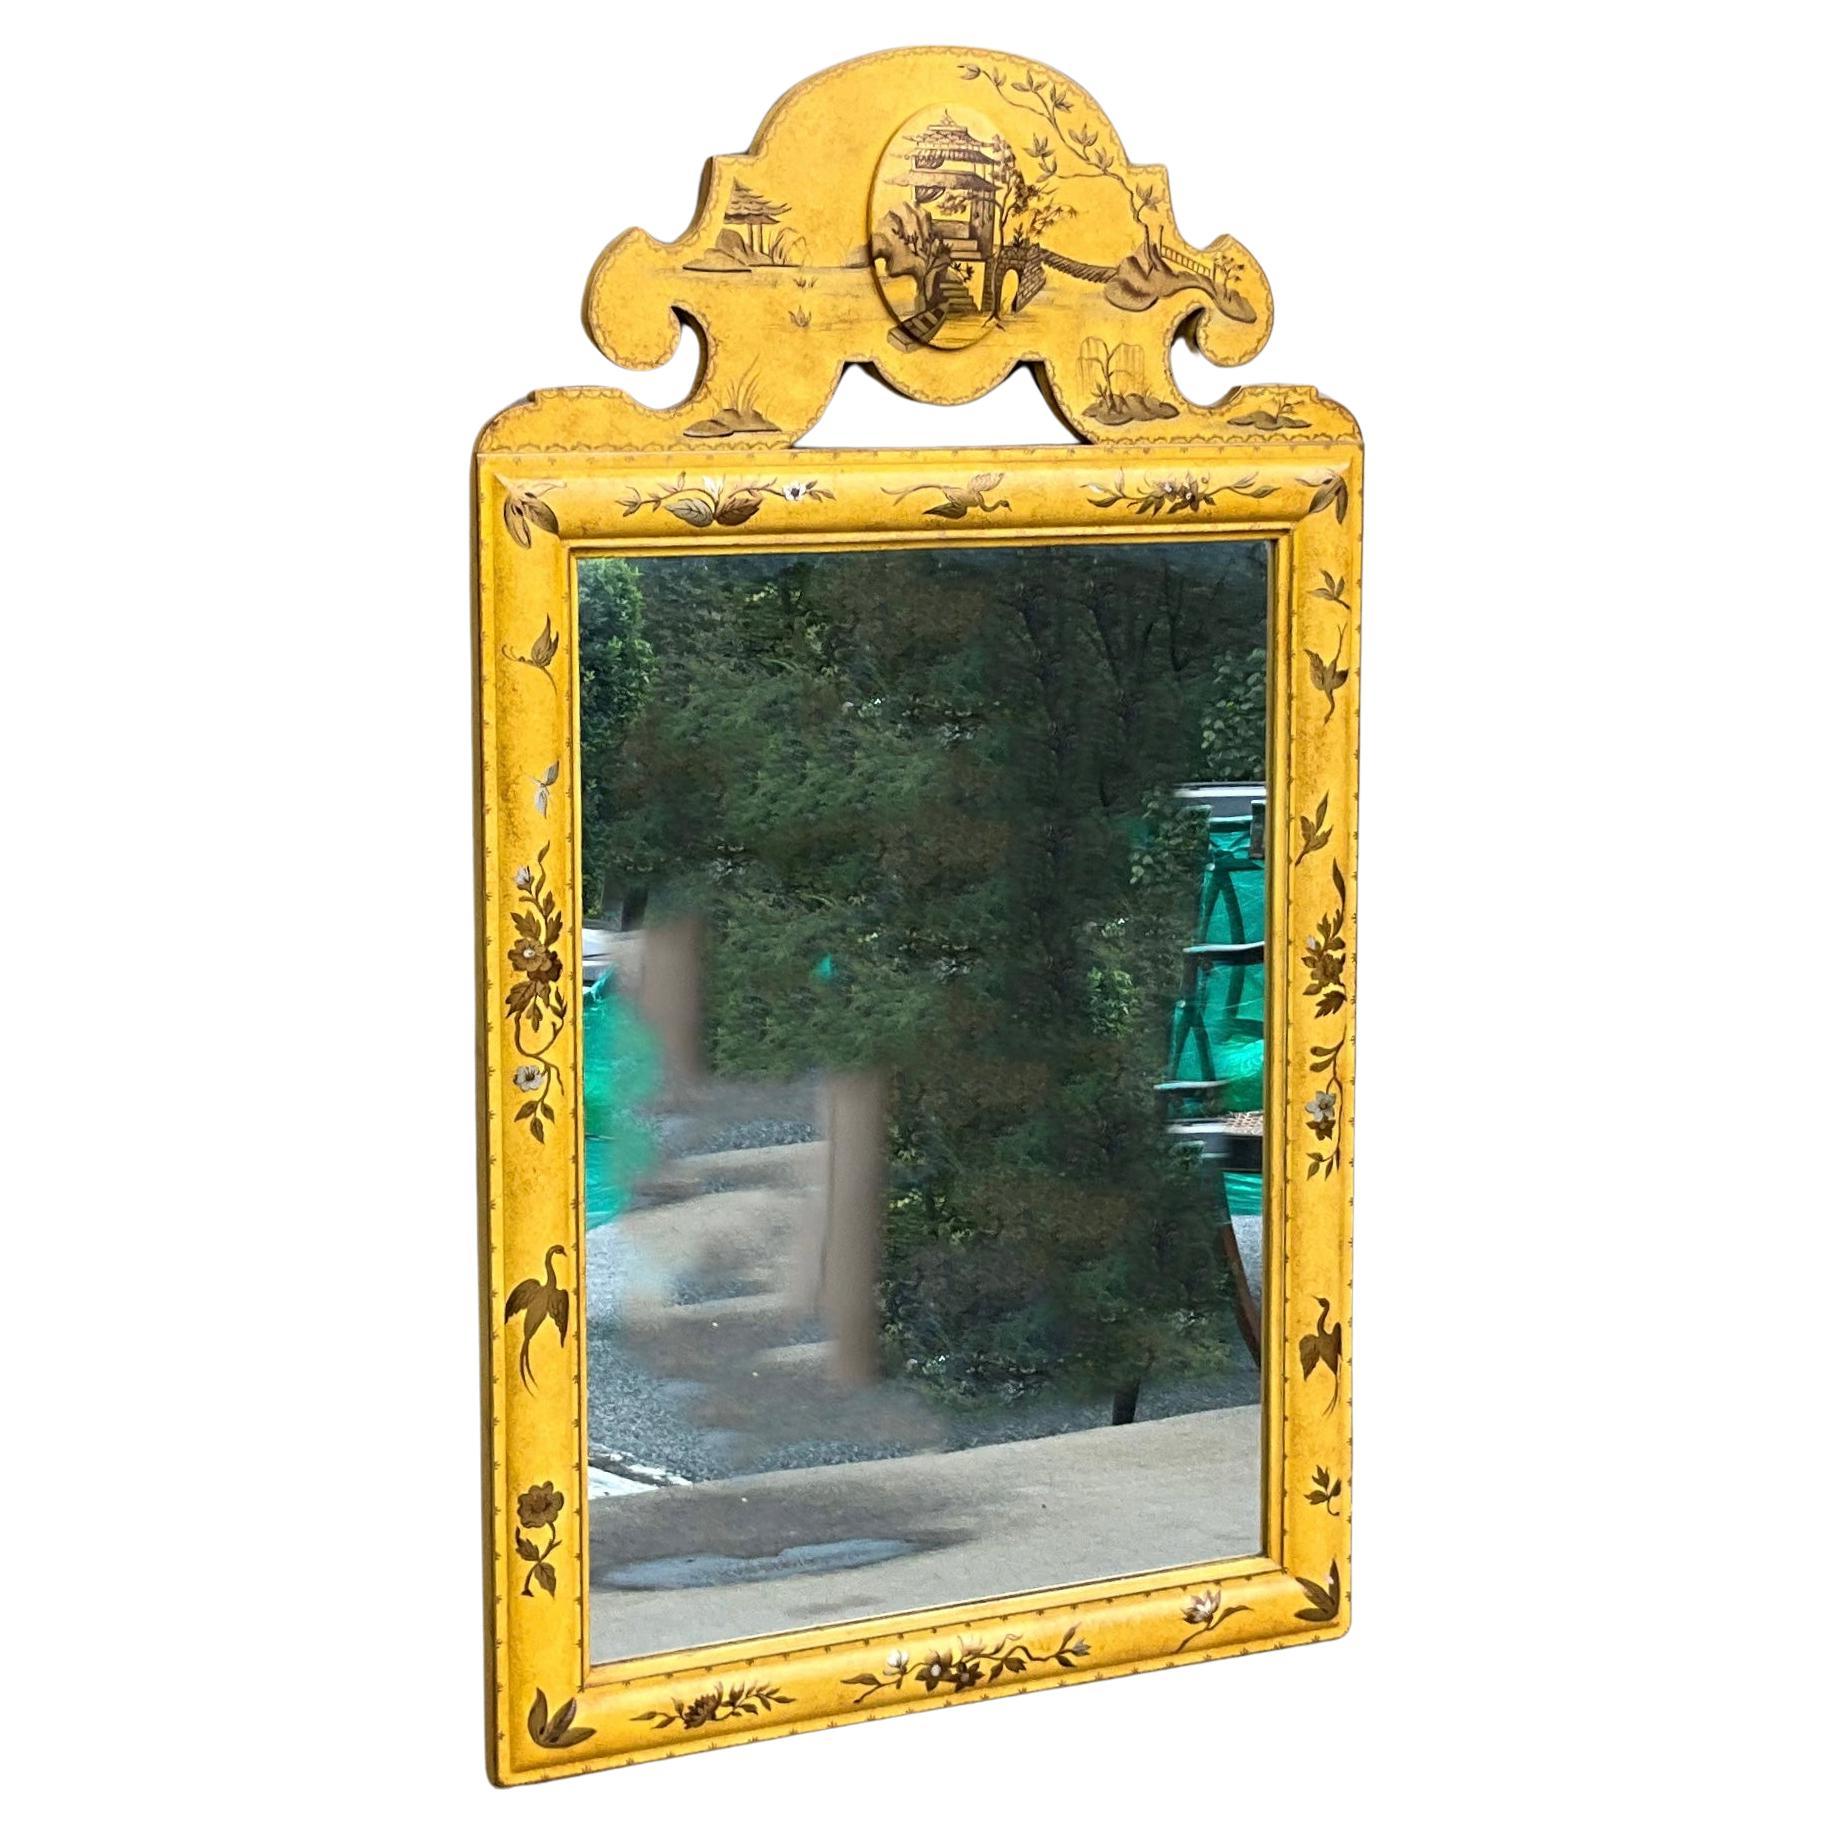 This is a mid-century hand painted regency style chinoiserie mirror. The carved wood cartouche is a mustard gold. The mirror is unmarked.